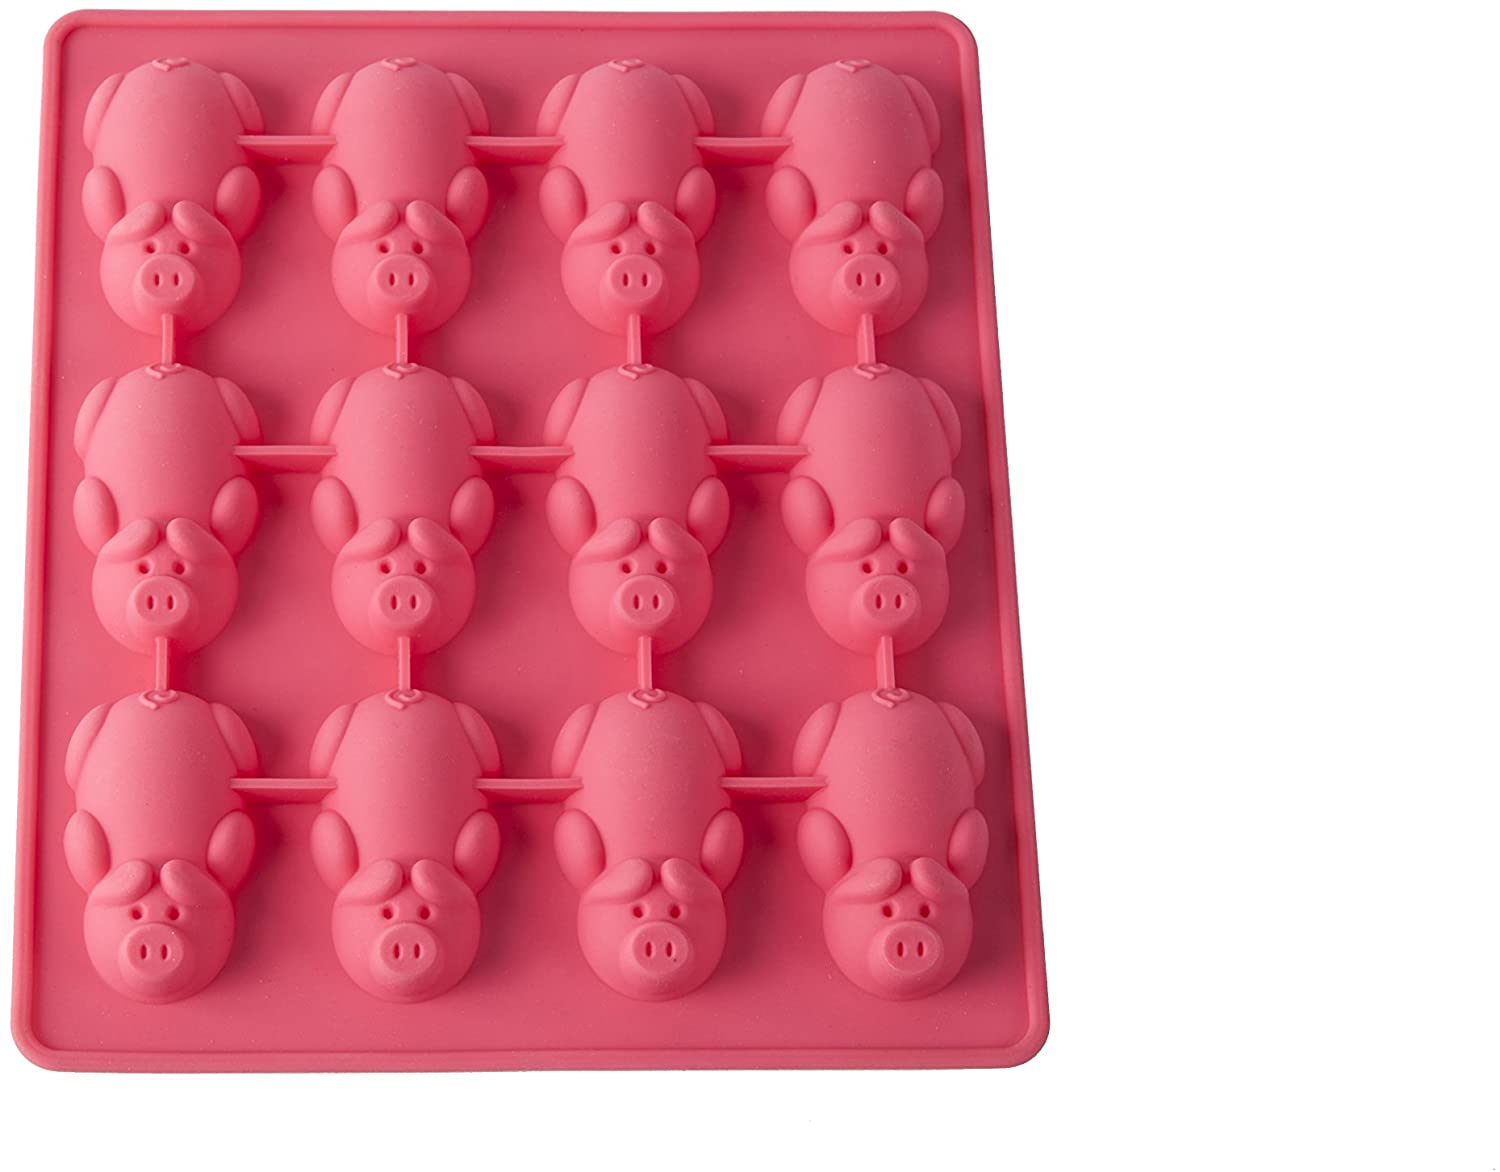 Mobi Silicone Mold - Pigs in a Blanket - Pink